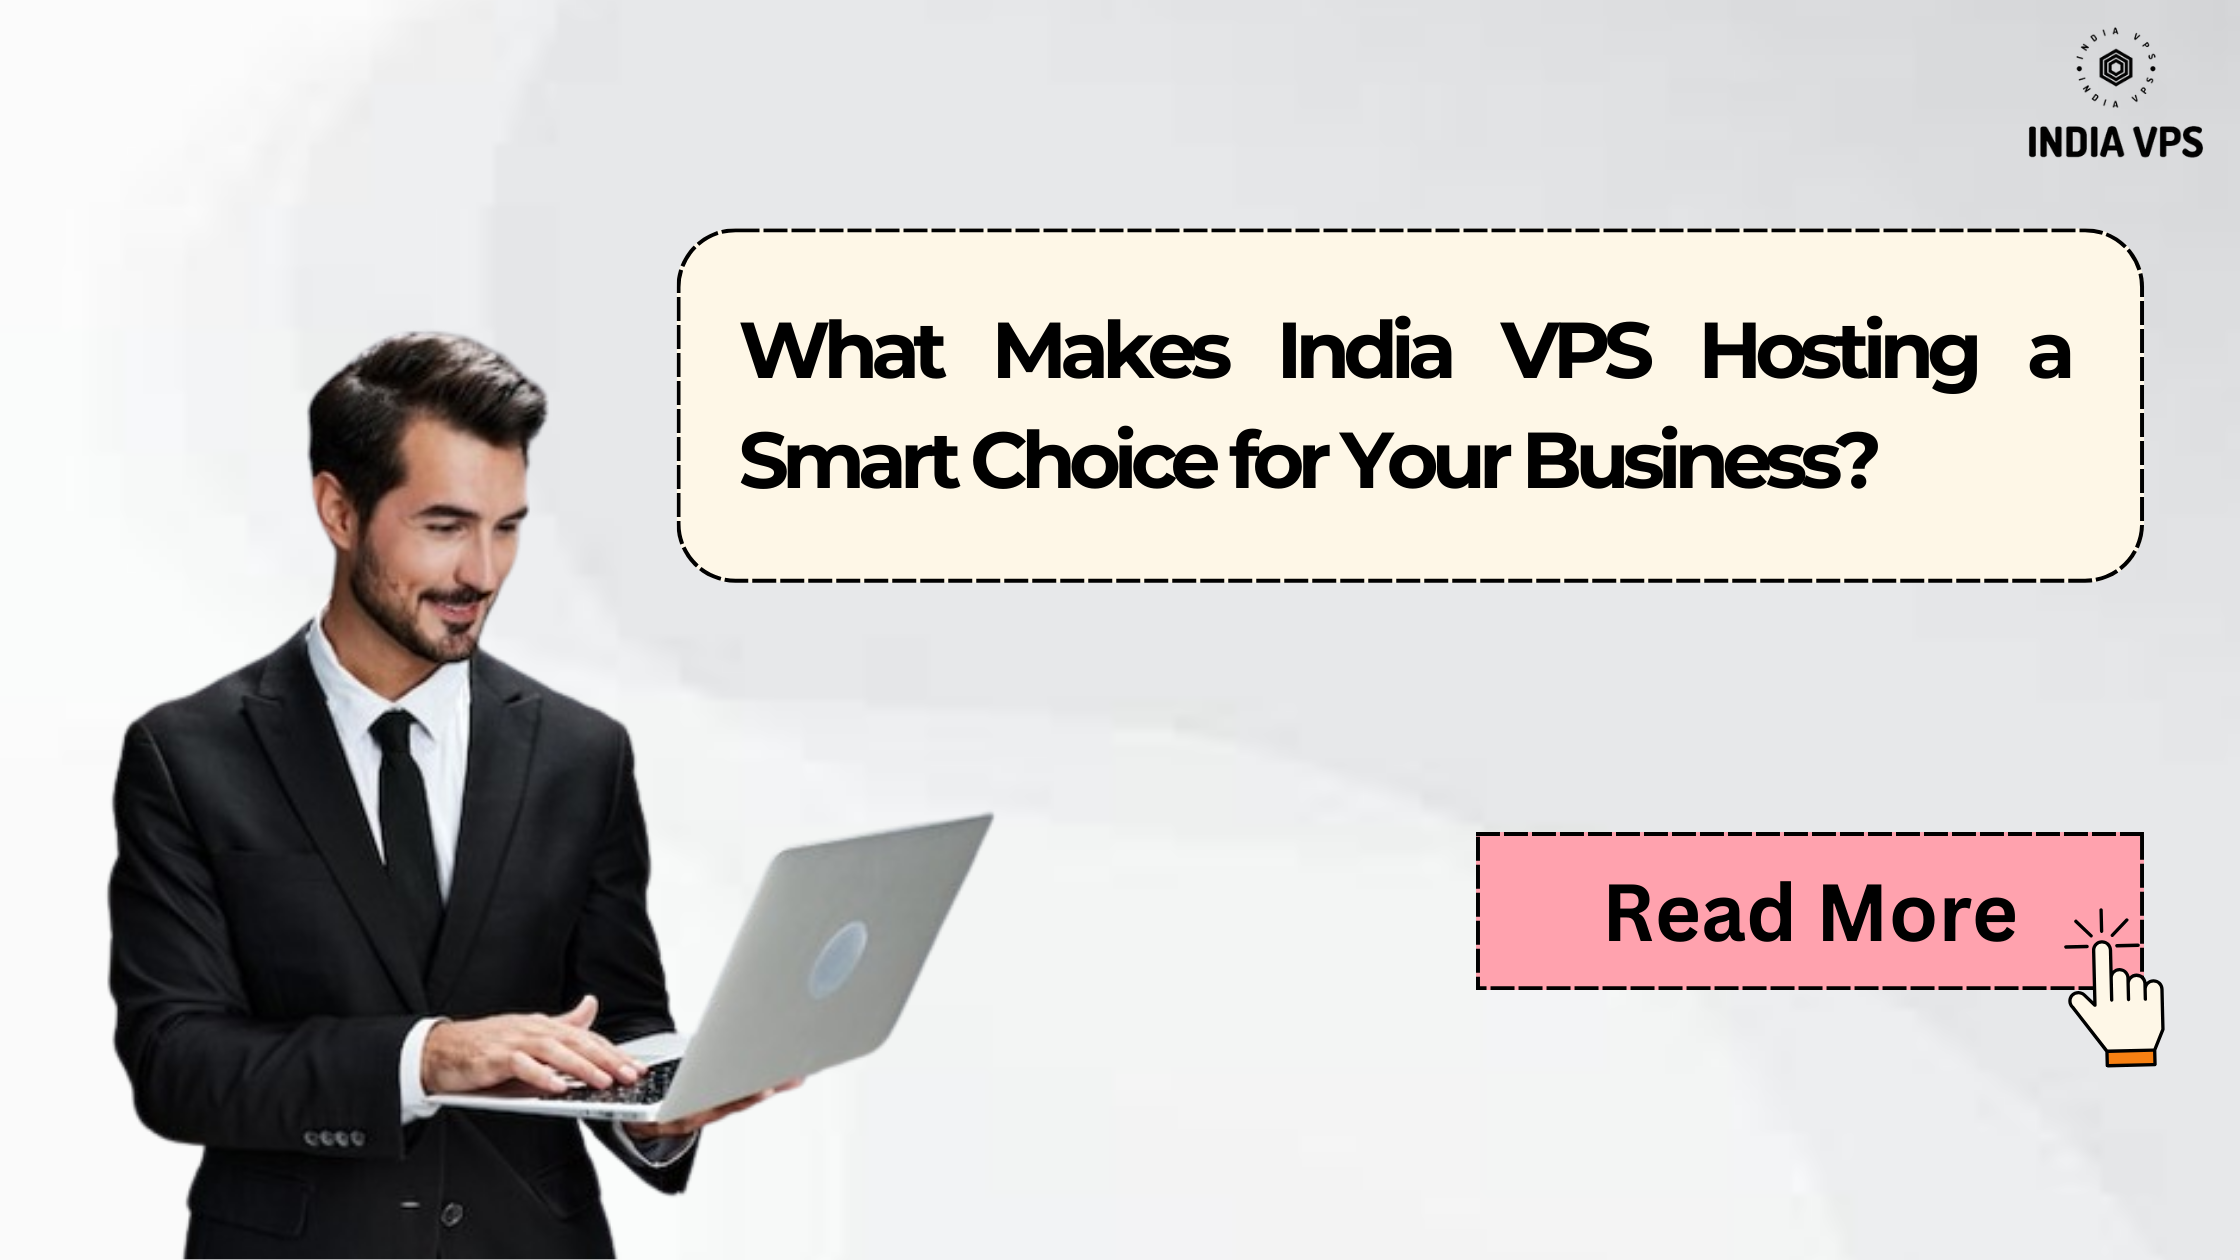 What Makes India VPS Hosting a Smart Choice for Your Business?